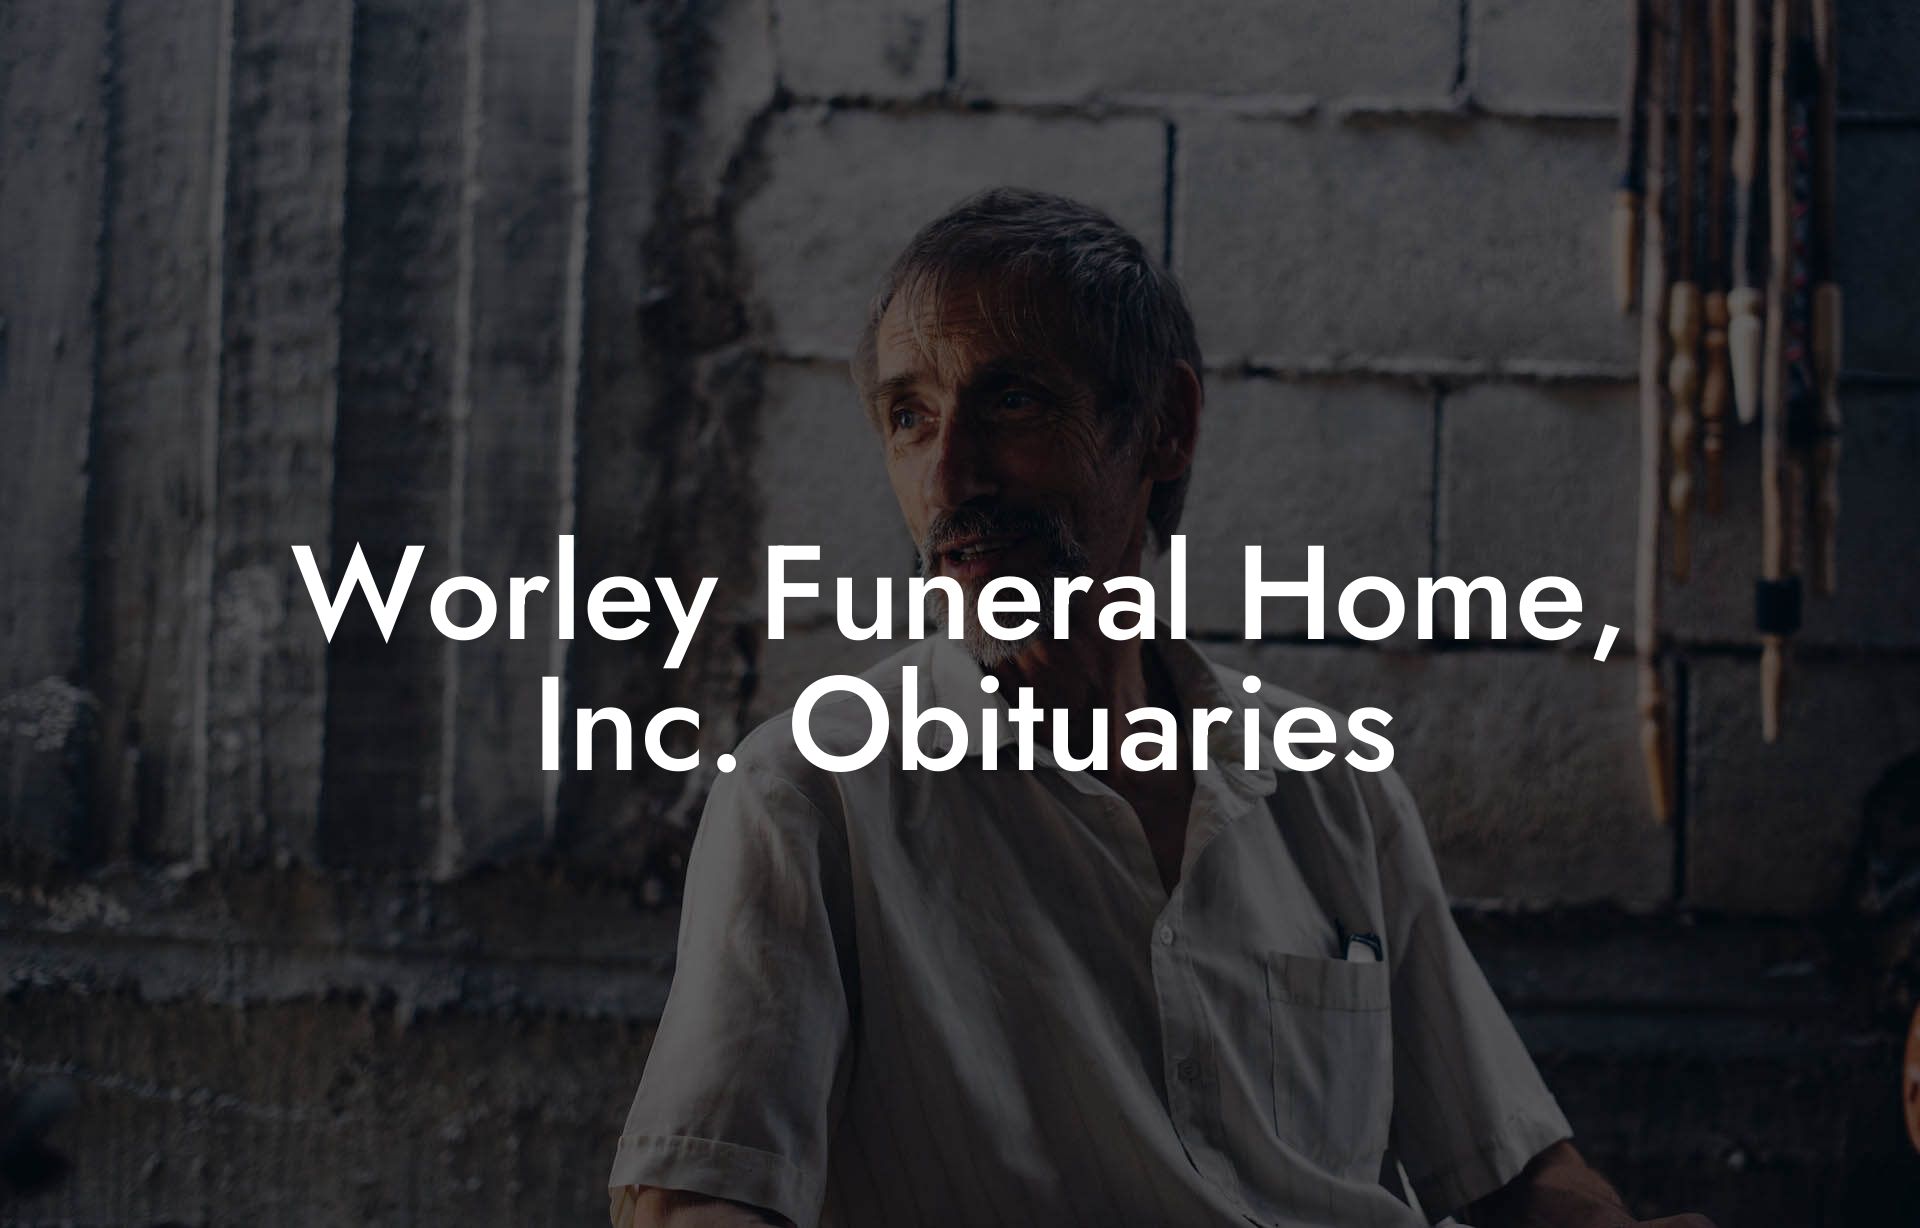 Worley Funeral Home, Inc. Obituaries